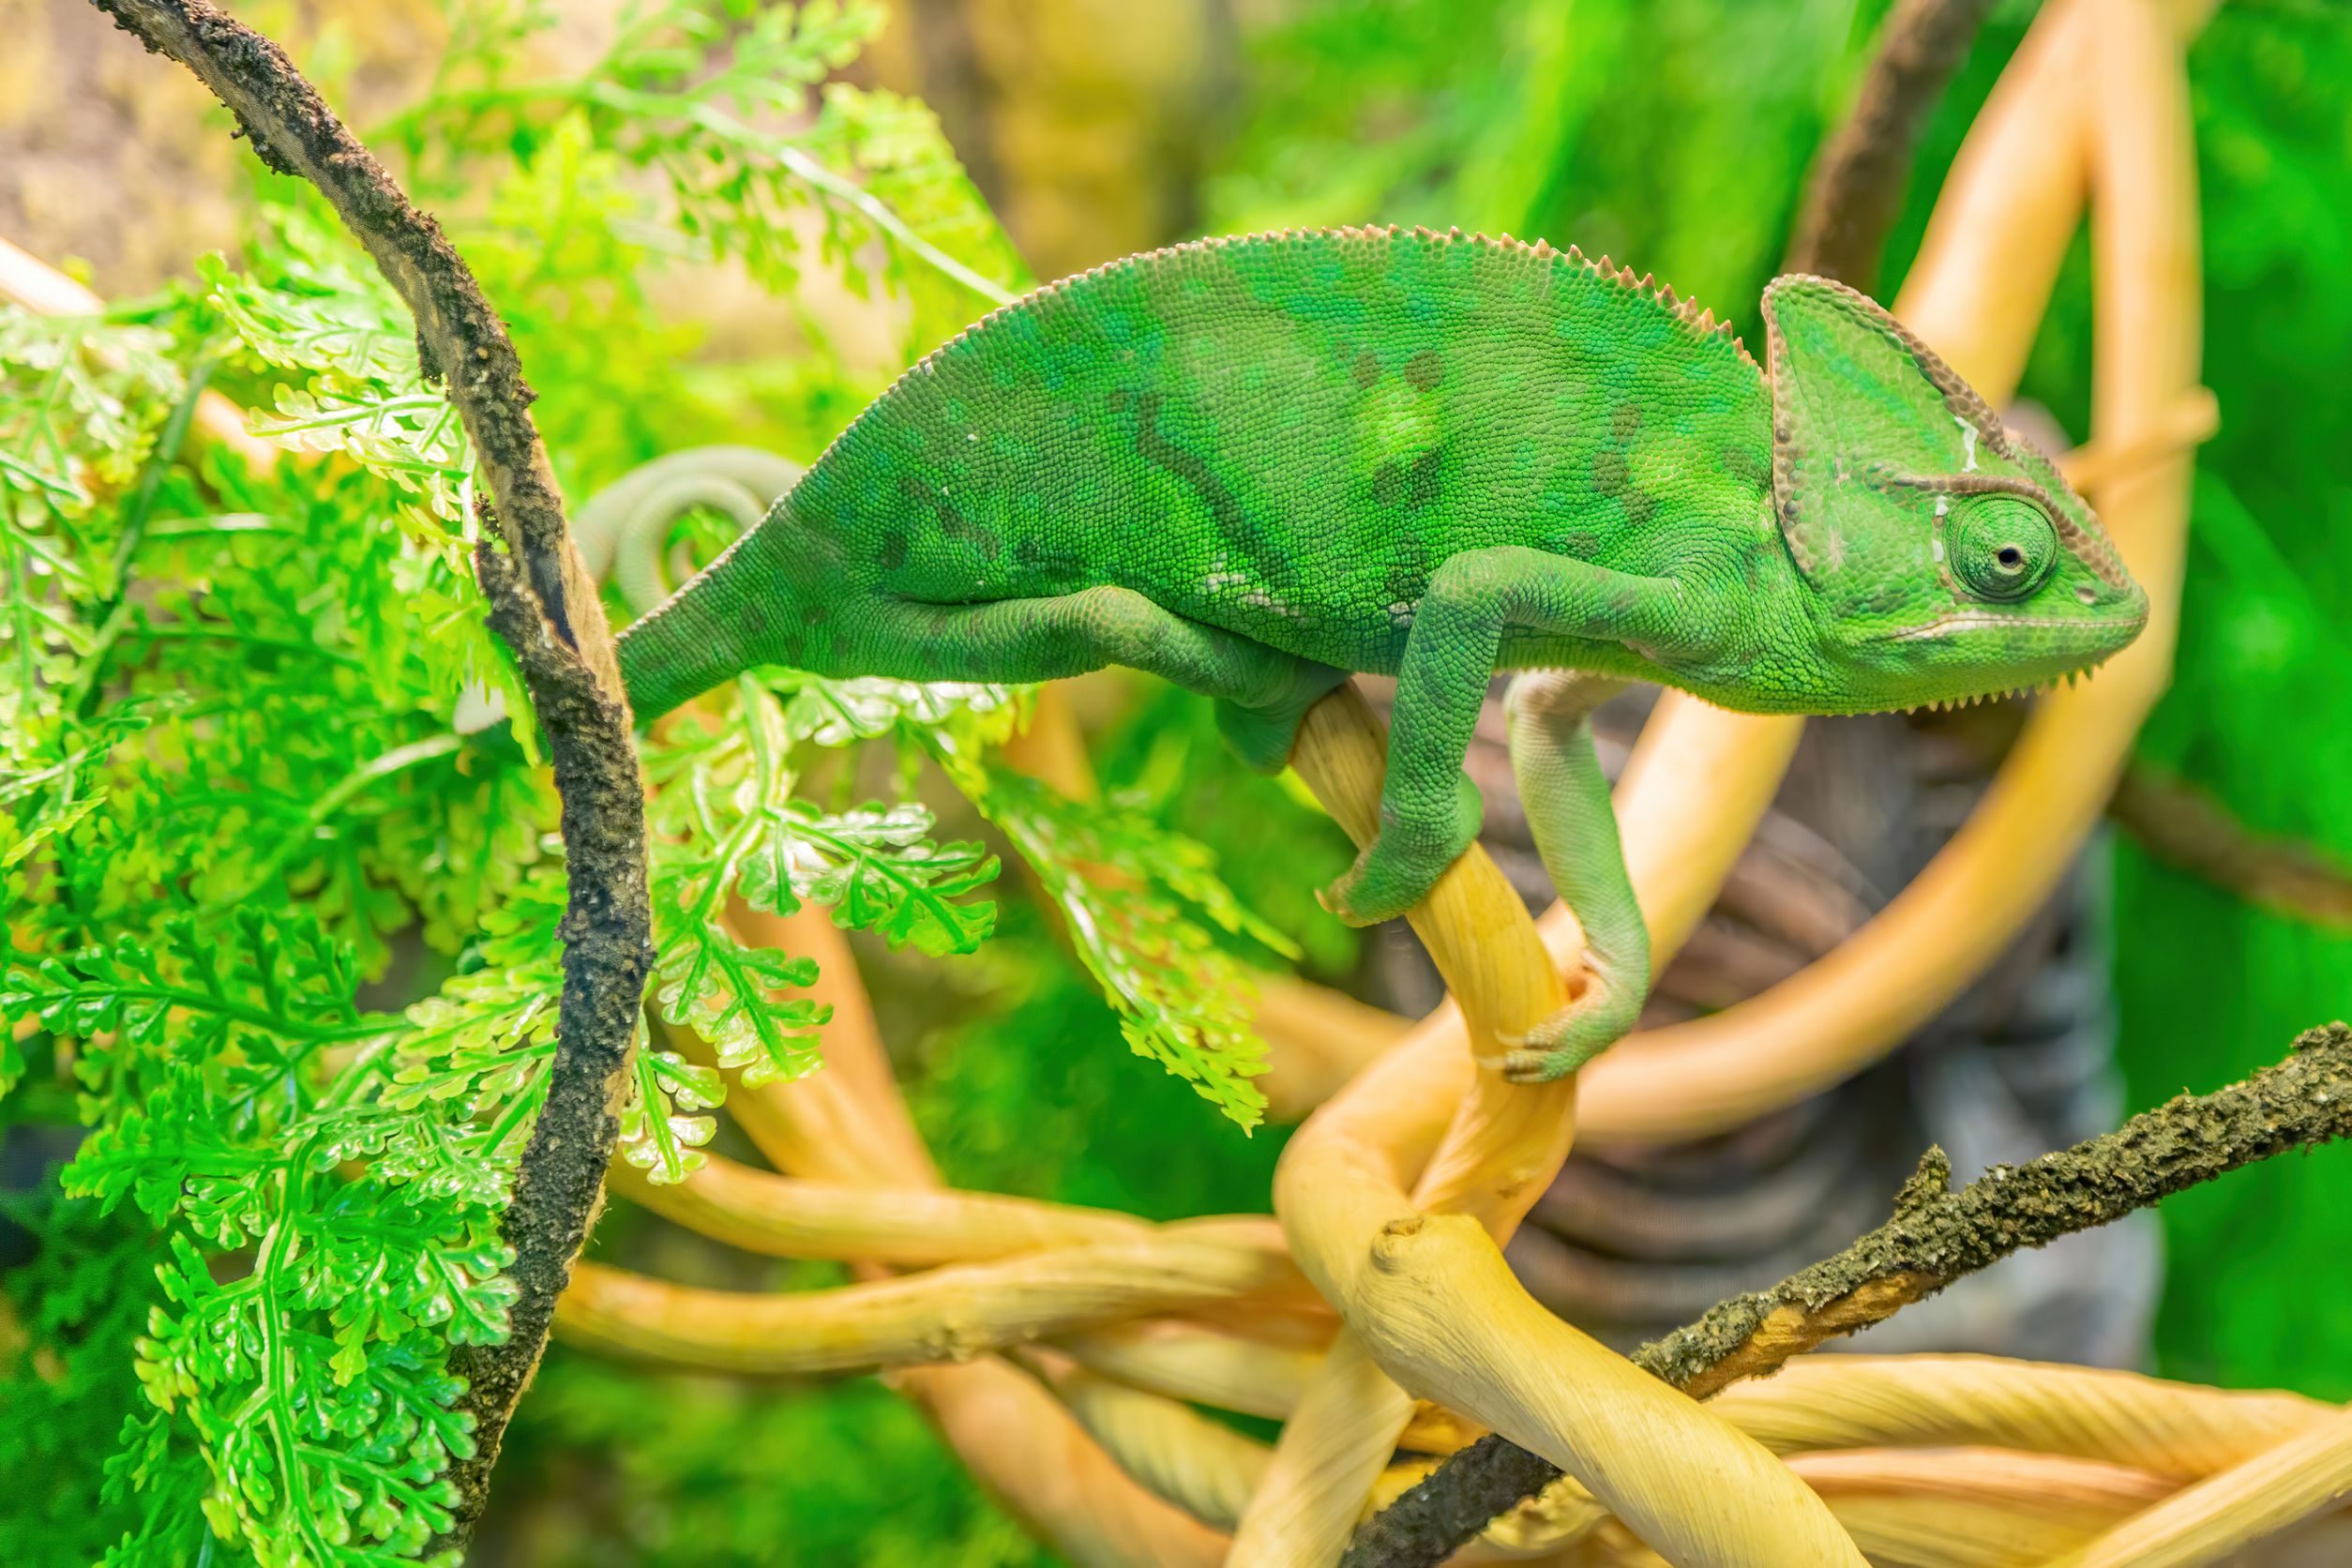 Chameleon changing color on a branch